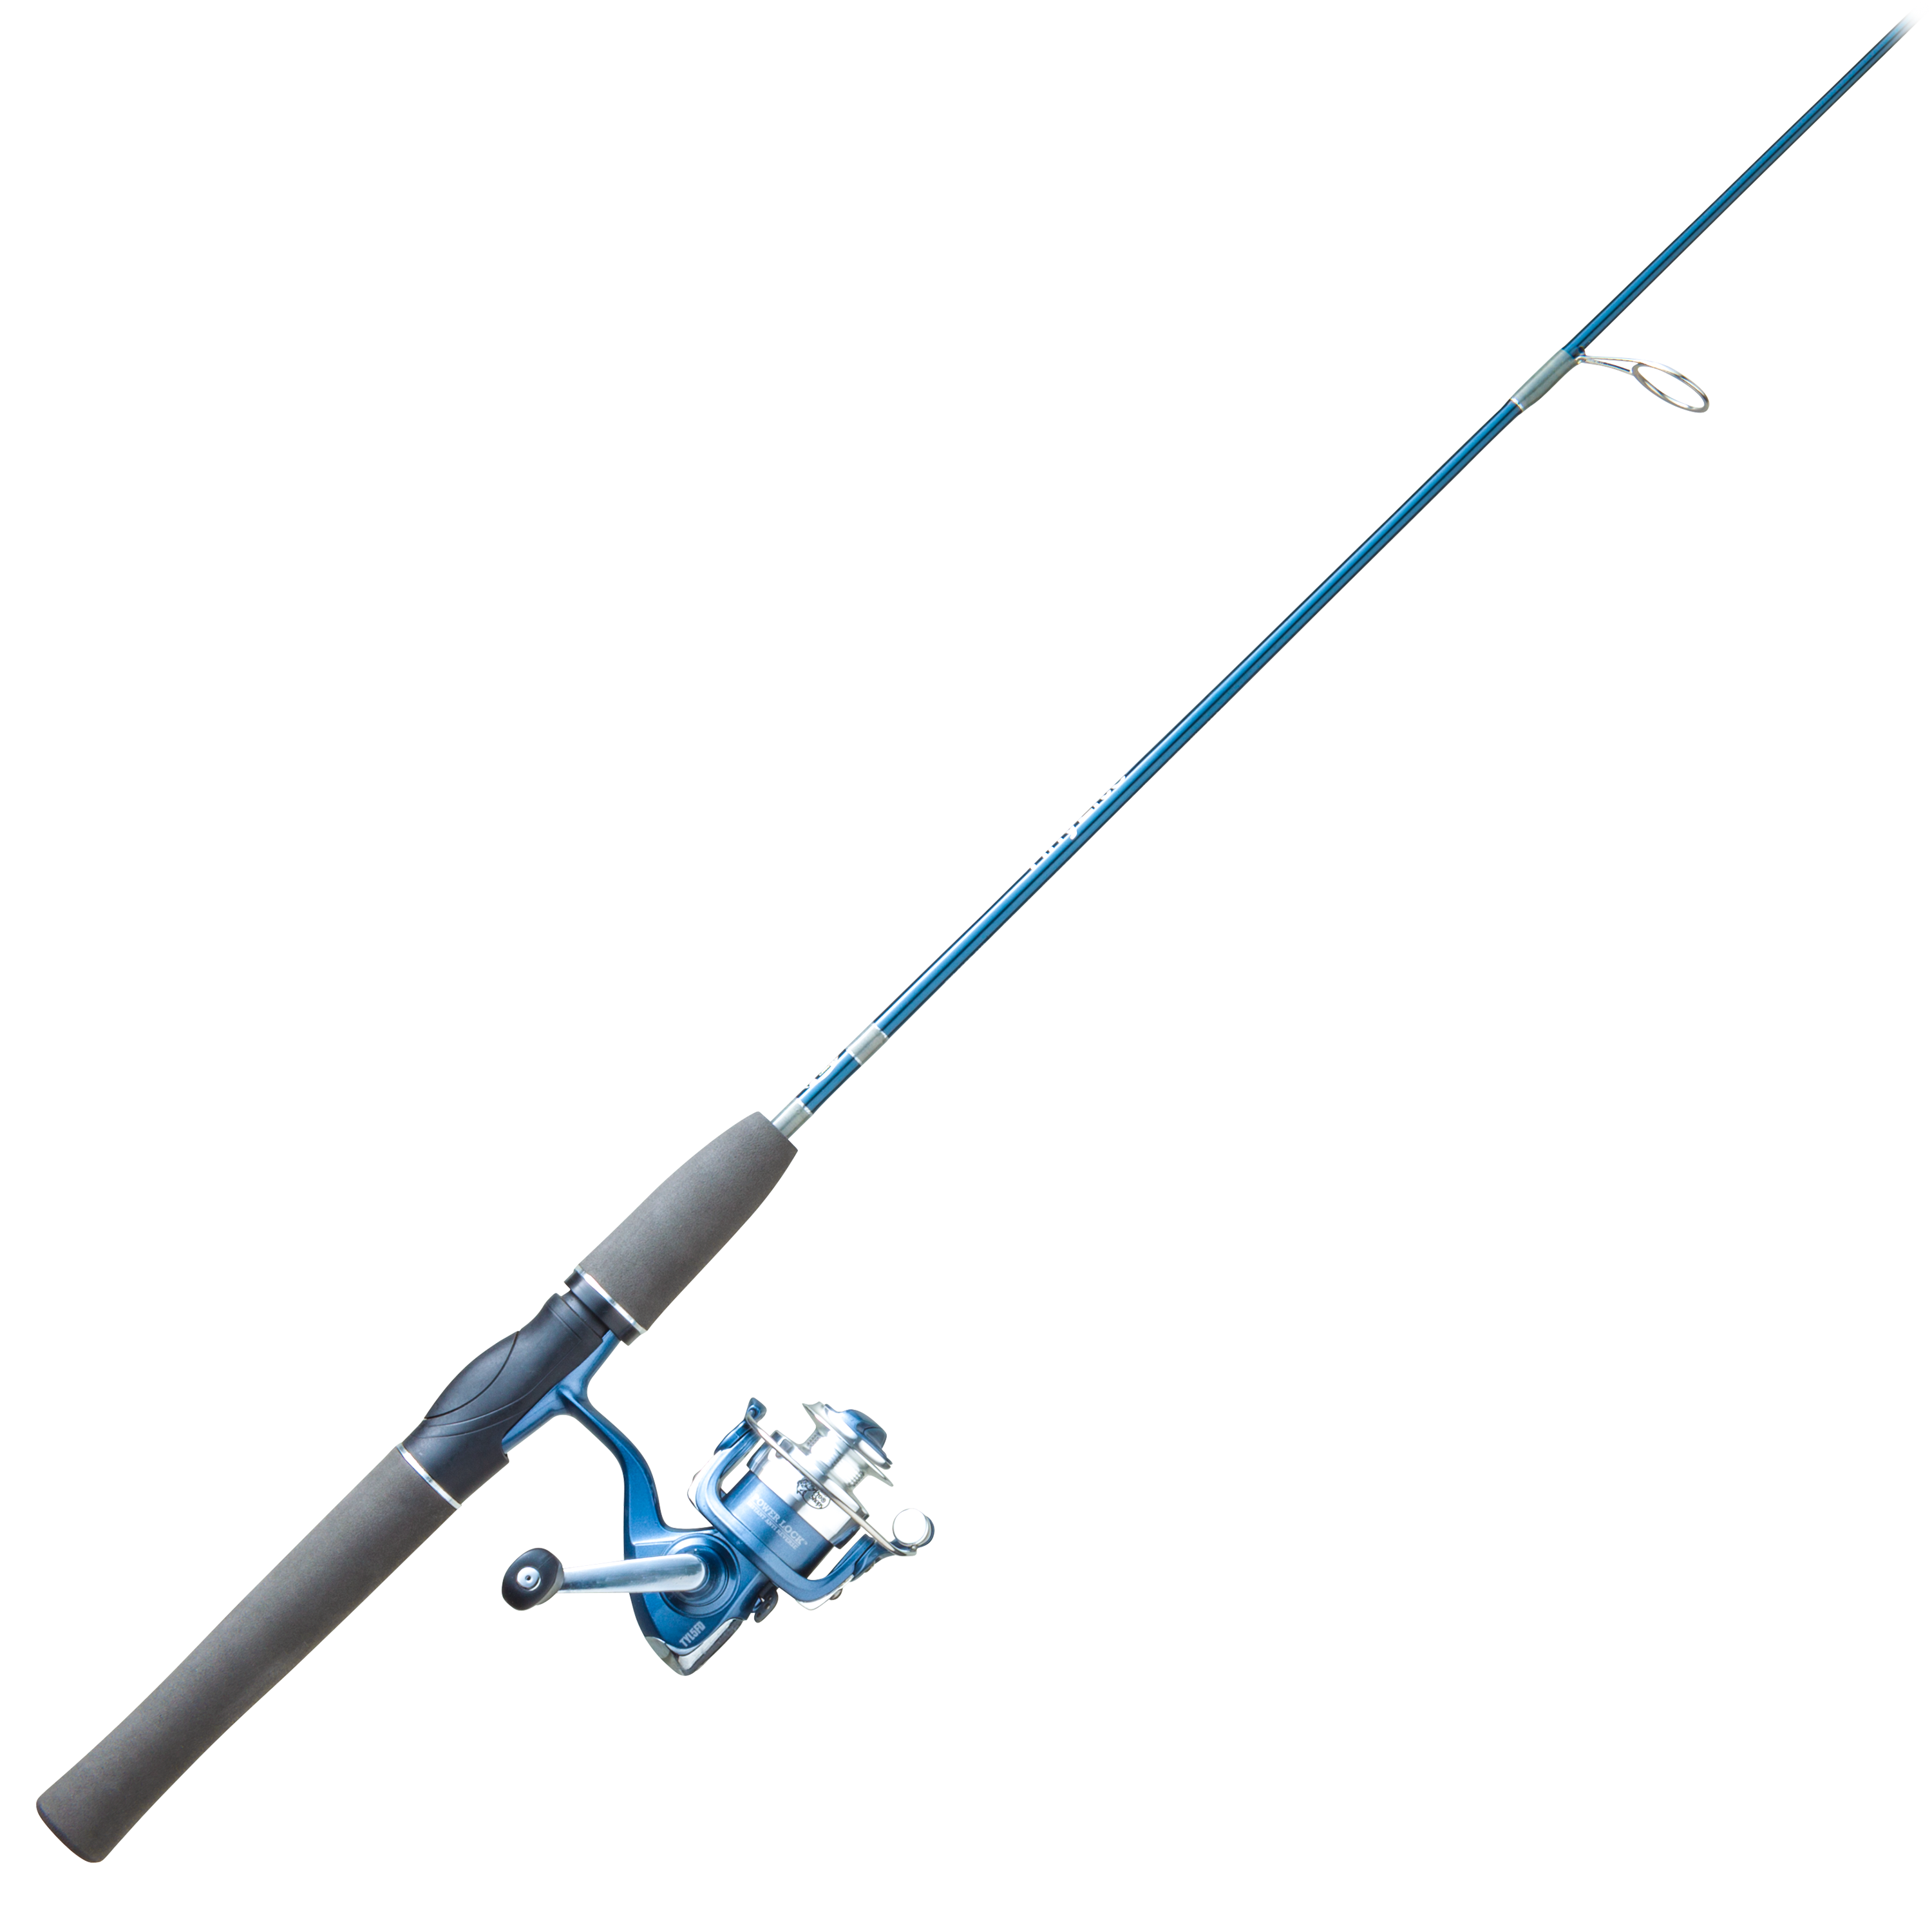 Light Saltwater Fishing Rod & Reel Combos 5.2: 1 Gear Ratio for